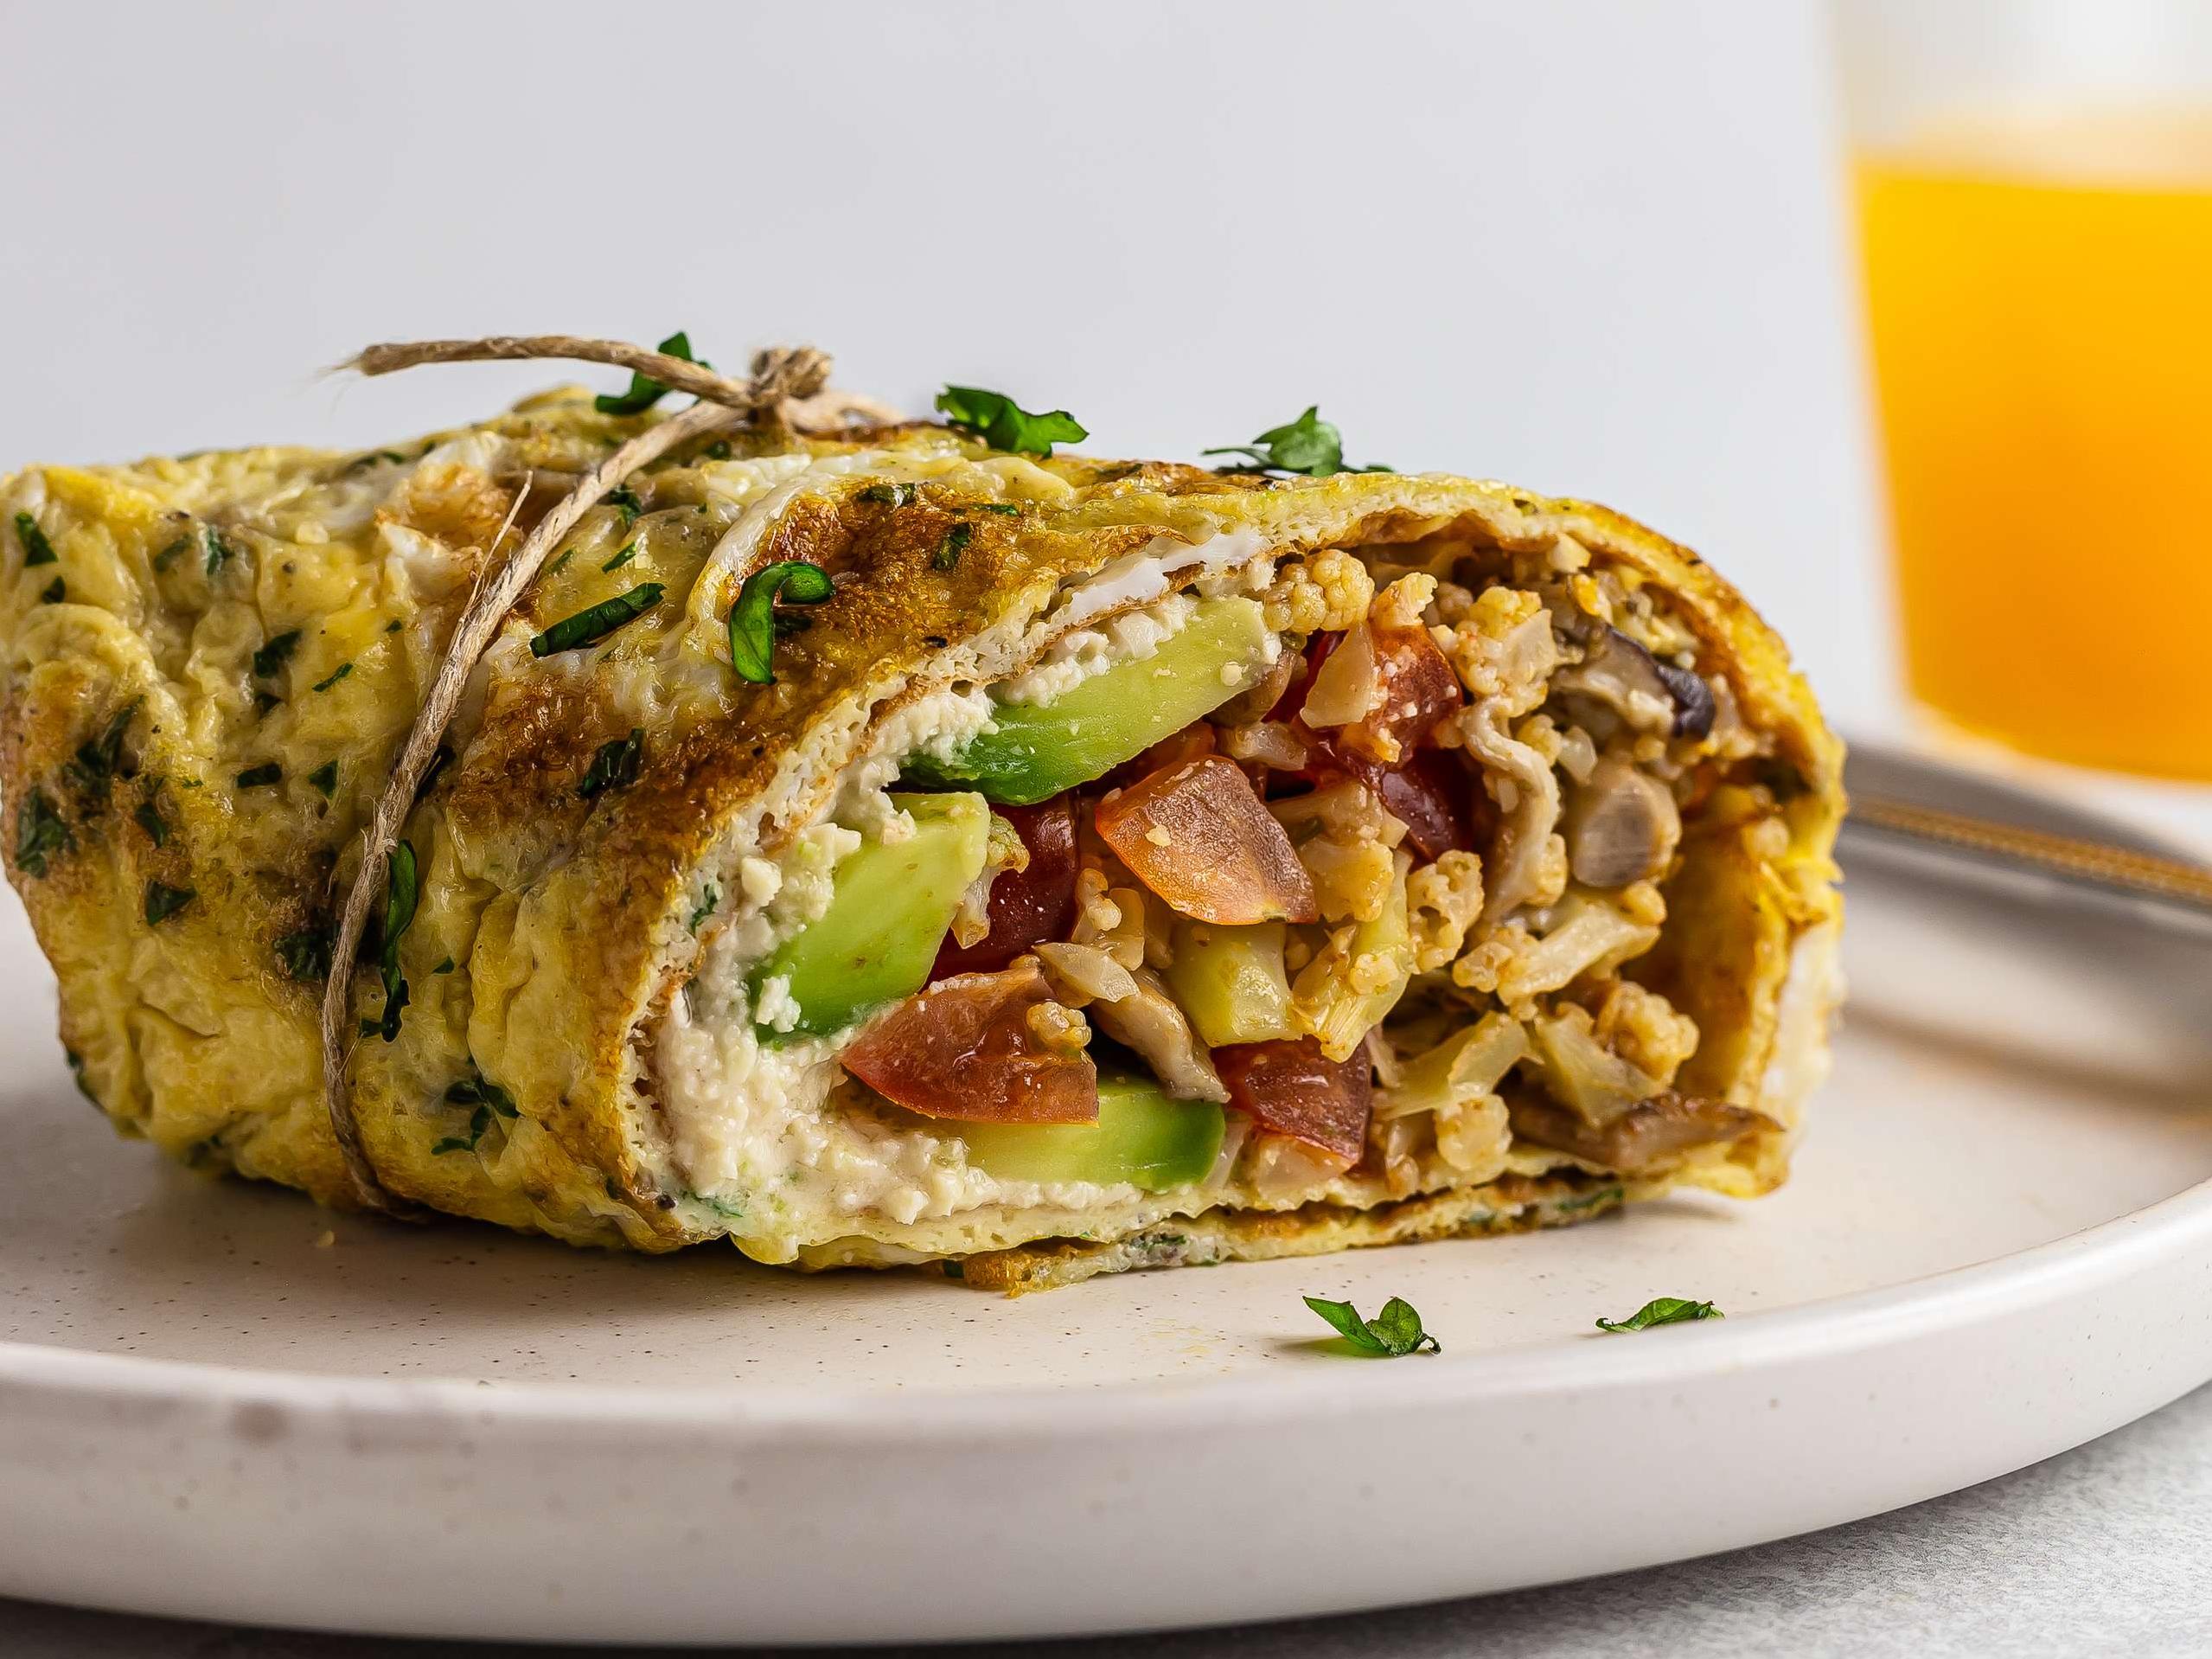  Start your day off right with a hearty and healthy burrito filled with protein-packed ingredients.